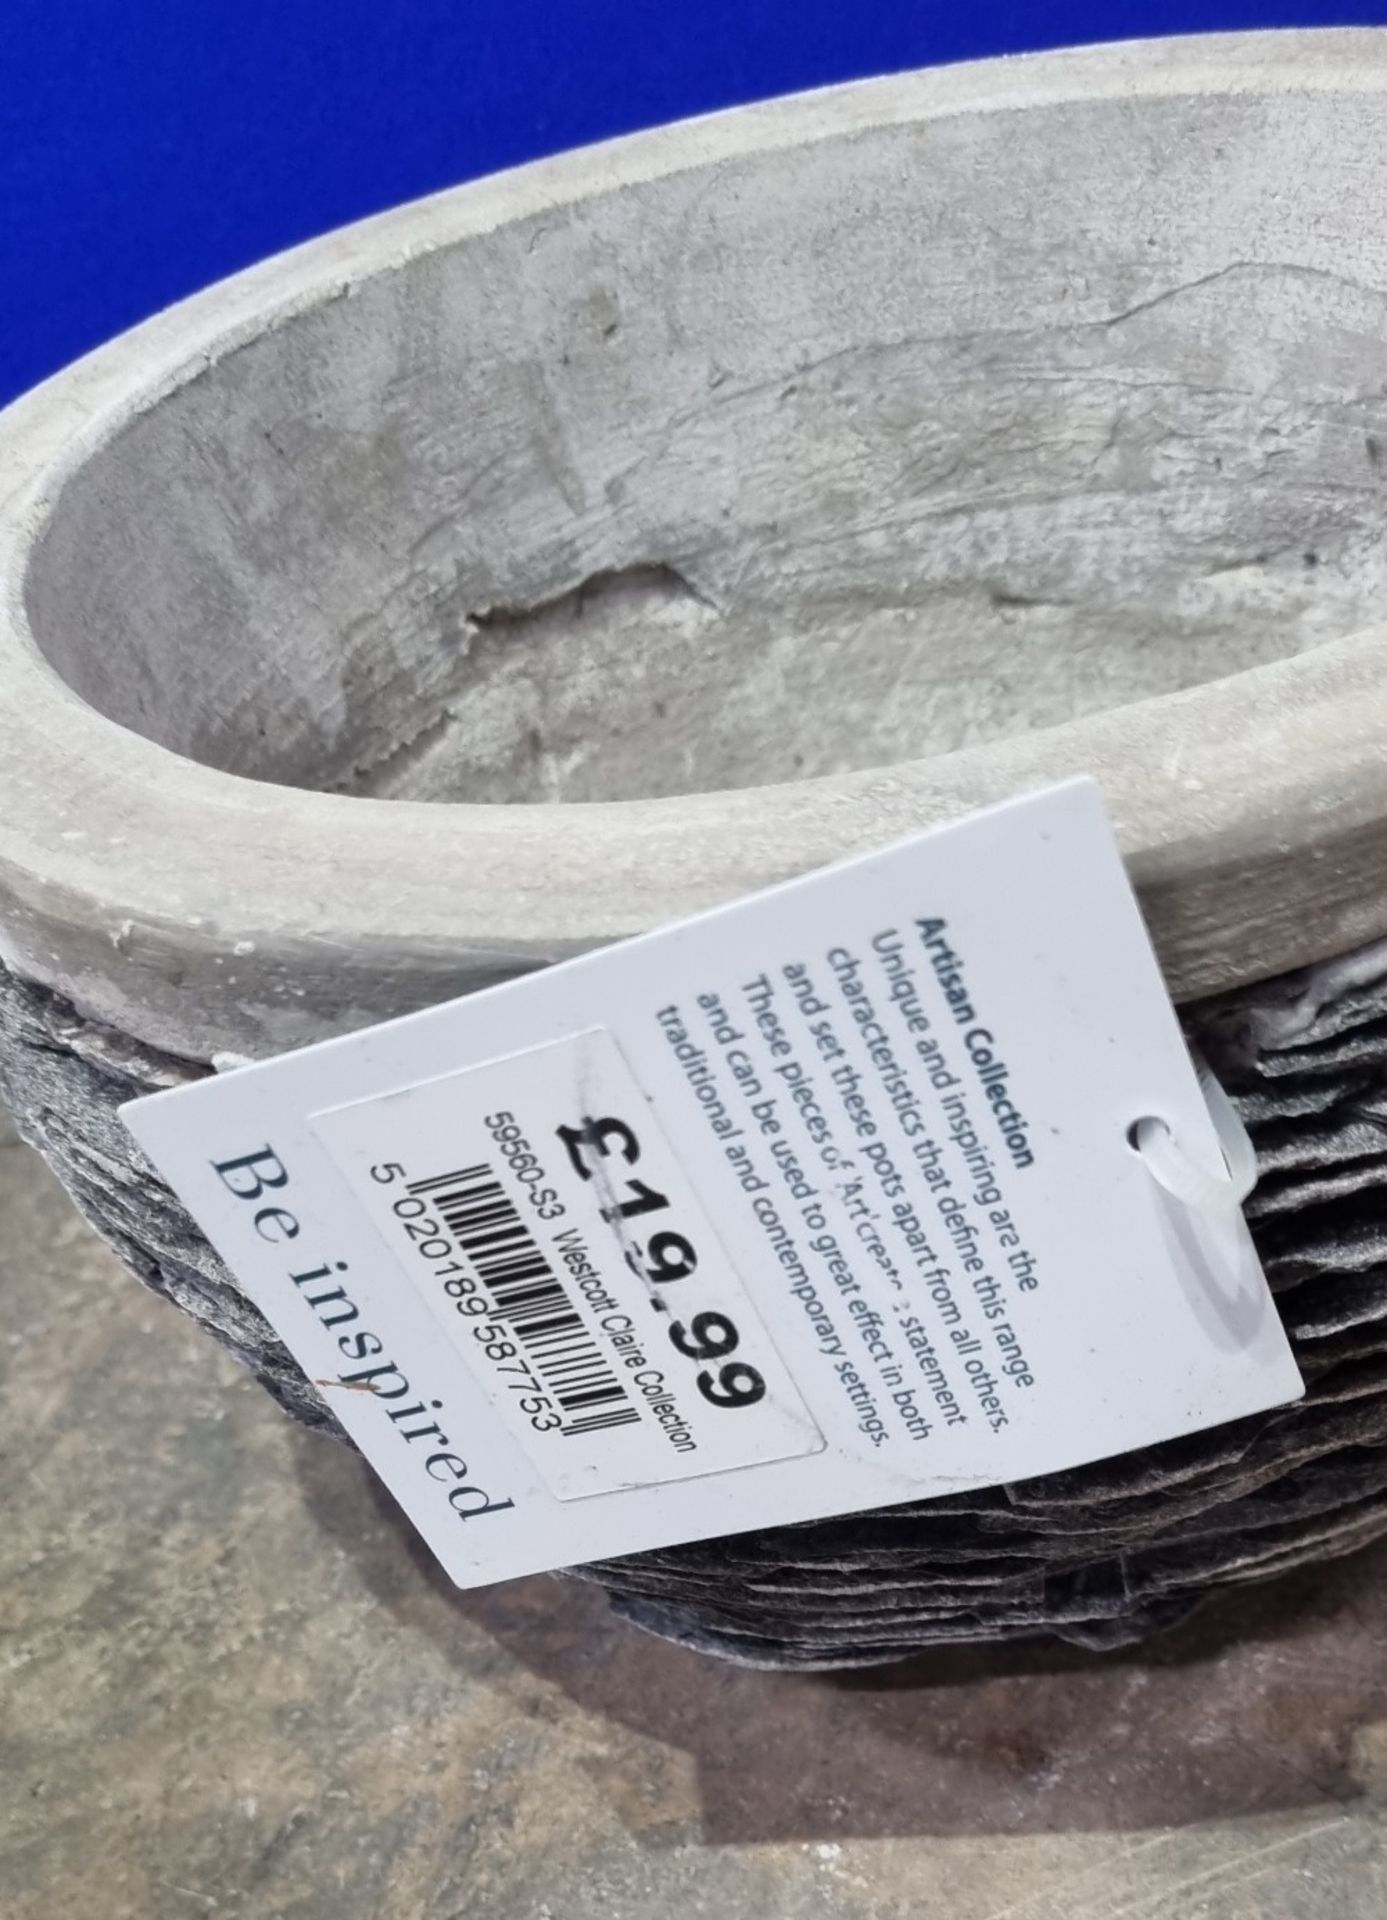 3 x Mims Artisan Westcott Claire Collection 59560-S3 Slate Planters | 140mm x 250mm | RRP £19.99 eac - Image 3 of 3